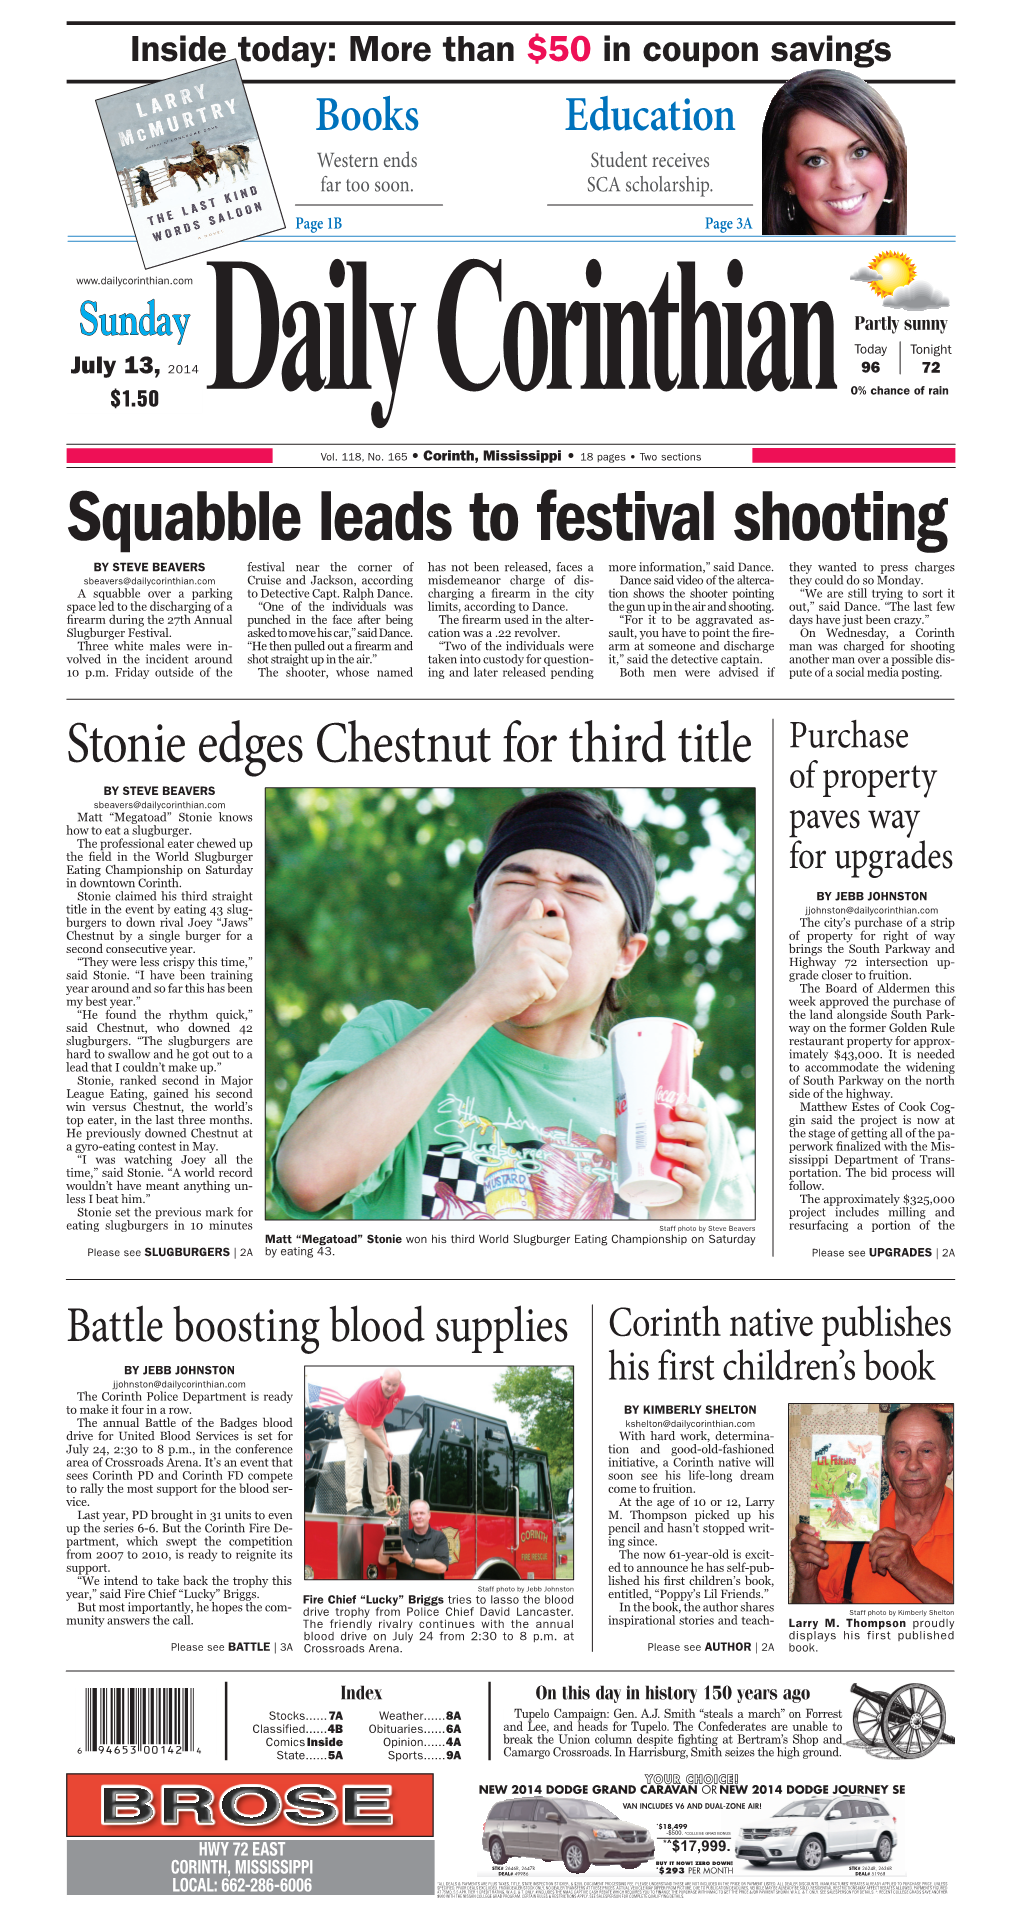 Squabble Leads to Festival Shooting by STEVE BEAVERS Festival Near the Corner of Has Not Been Released, Faces a More Information,” Said Dance